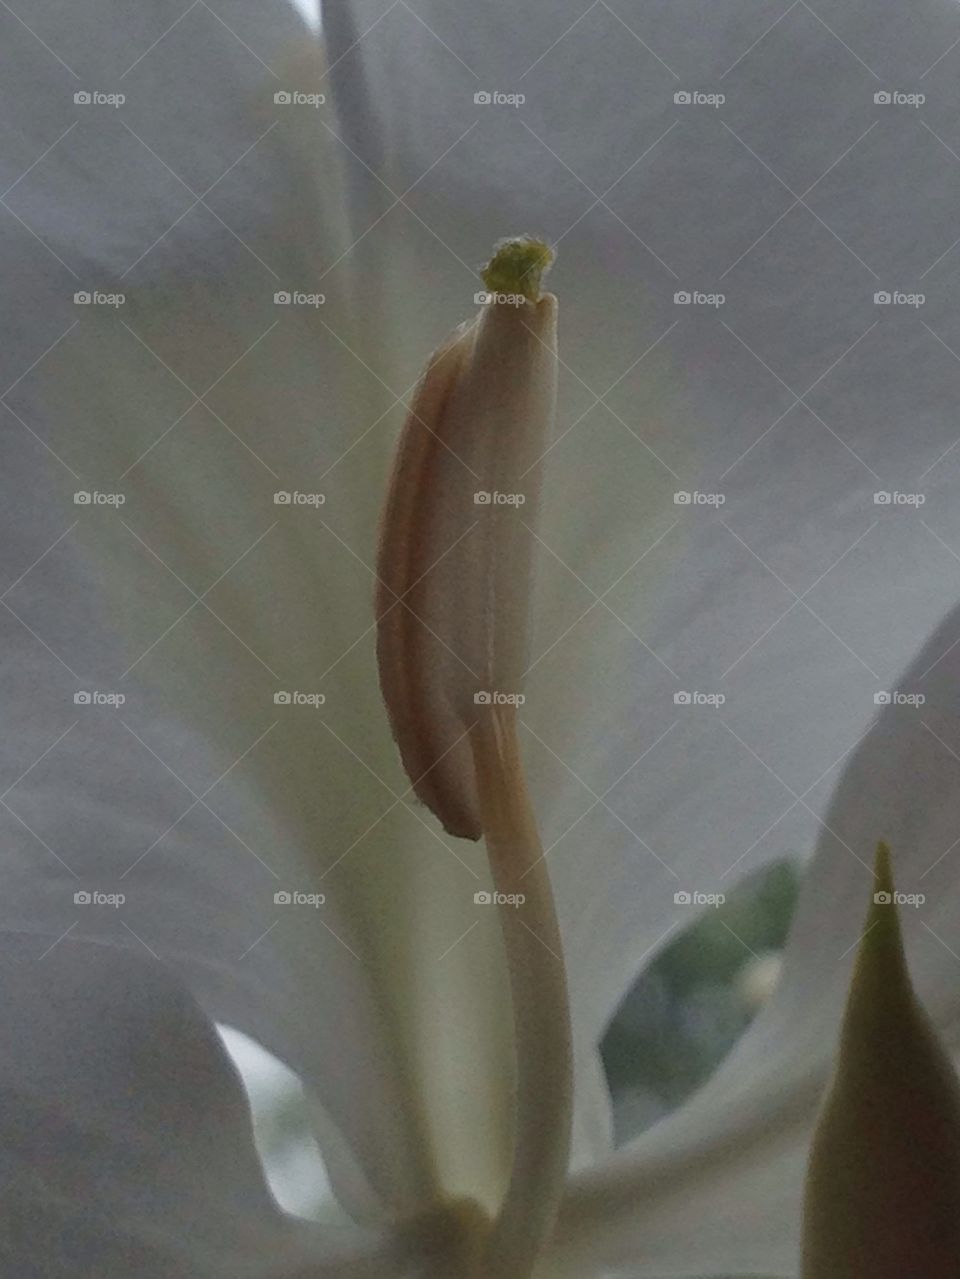 Stamen of a ginger lilly